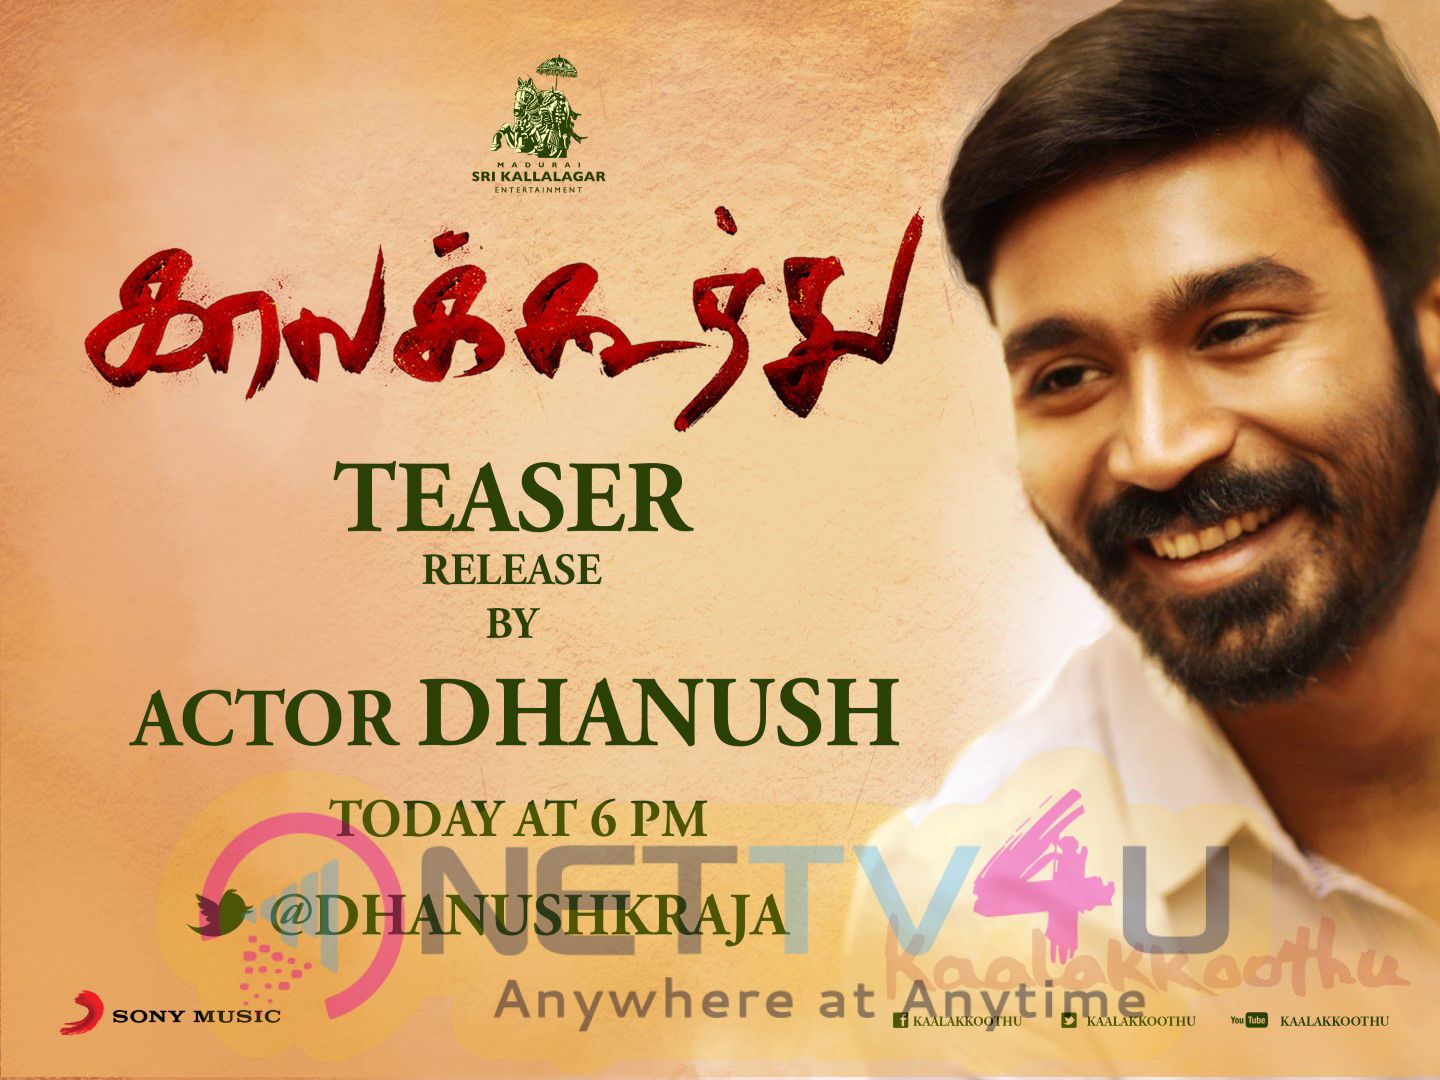 KaalaKoothu Teaser To Be Released By Actor Dhanush By 6PM Today Poster Tamil Gallery